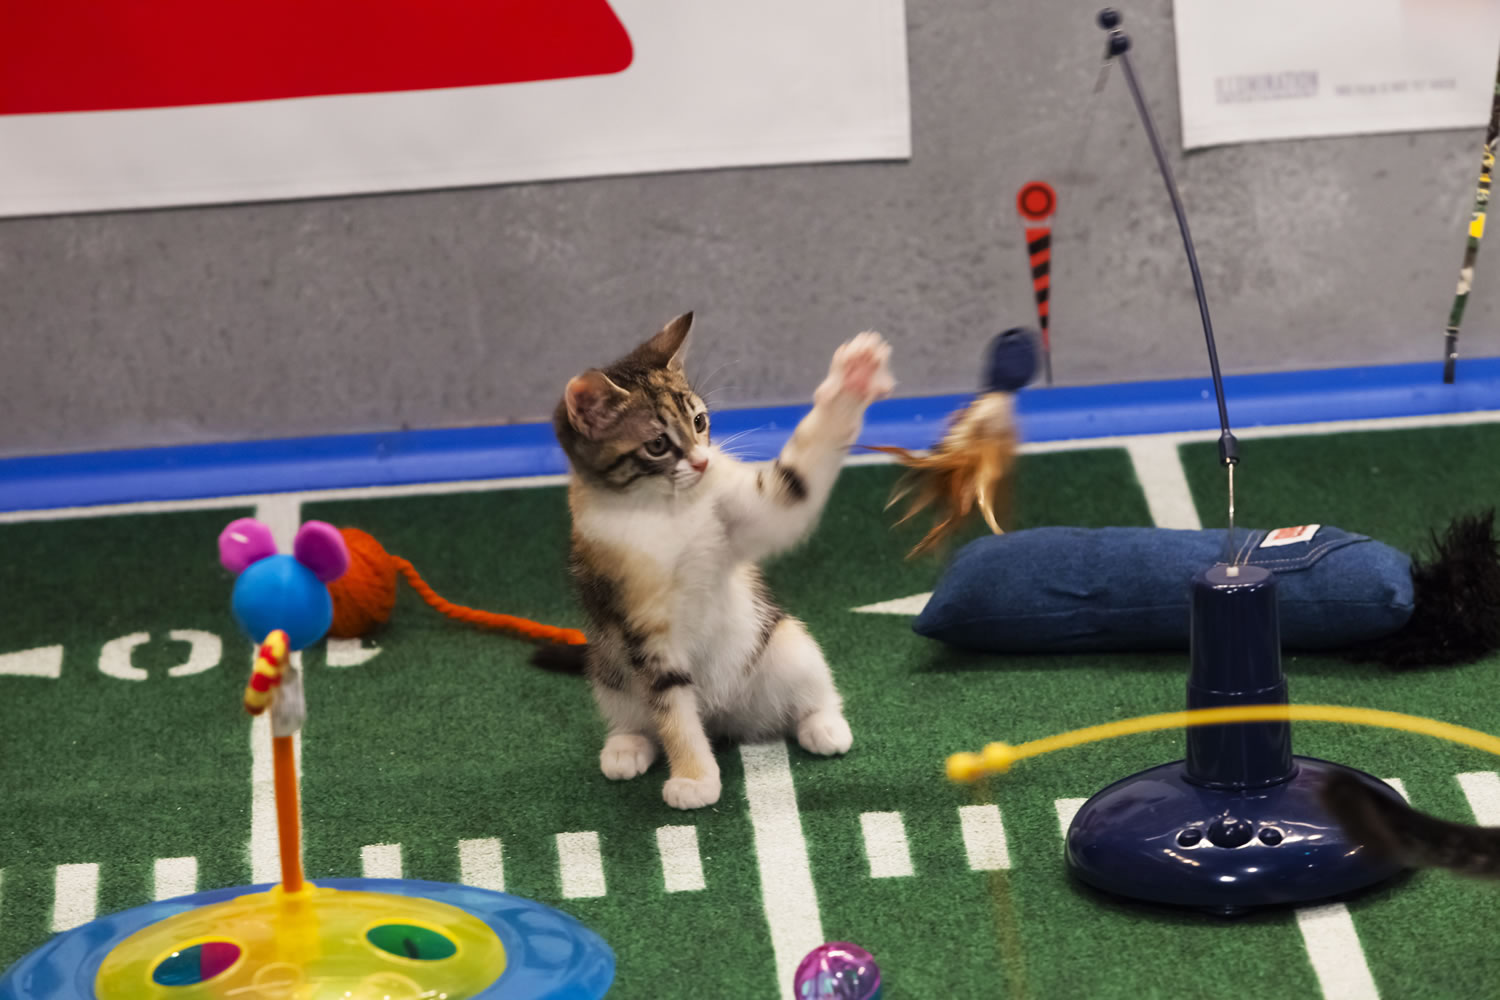 A kitten plays during the halftime show of Puppy Bowl IX in New York.